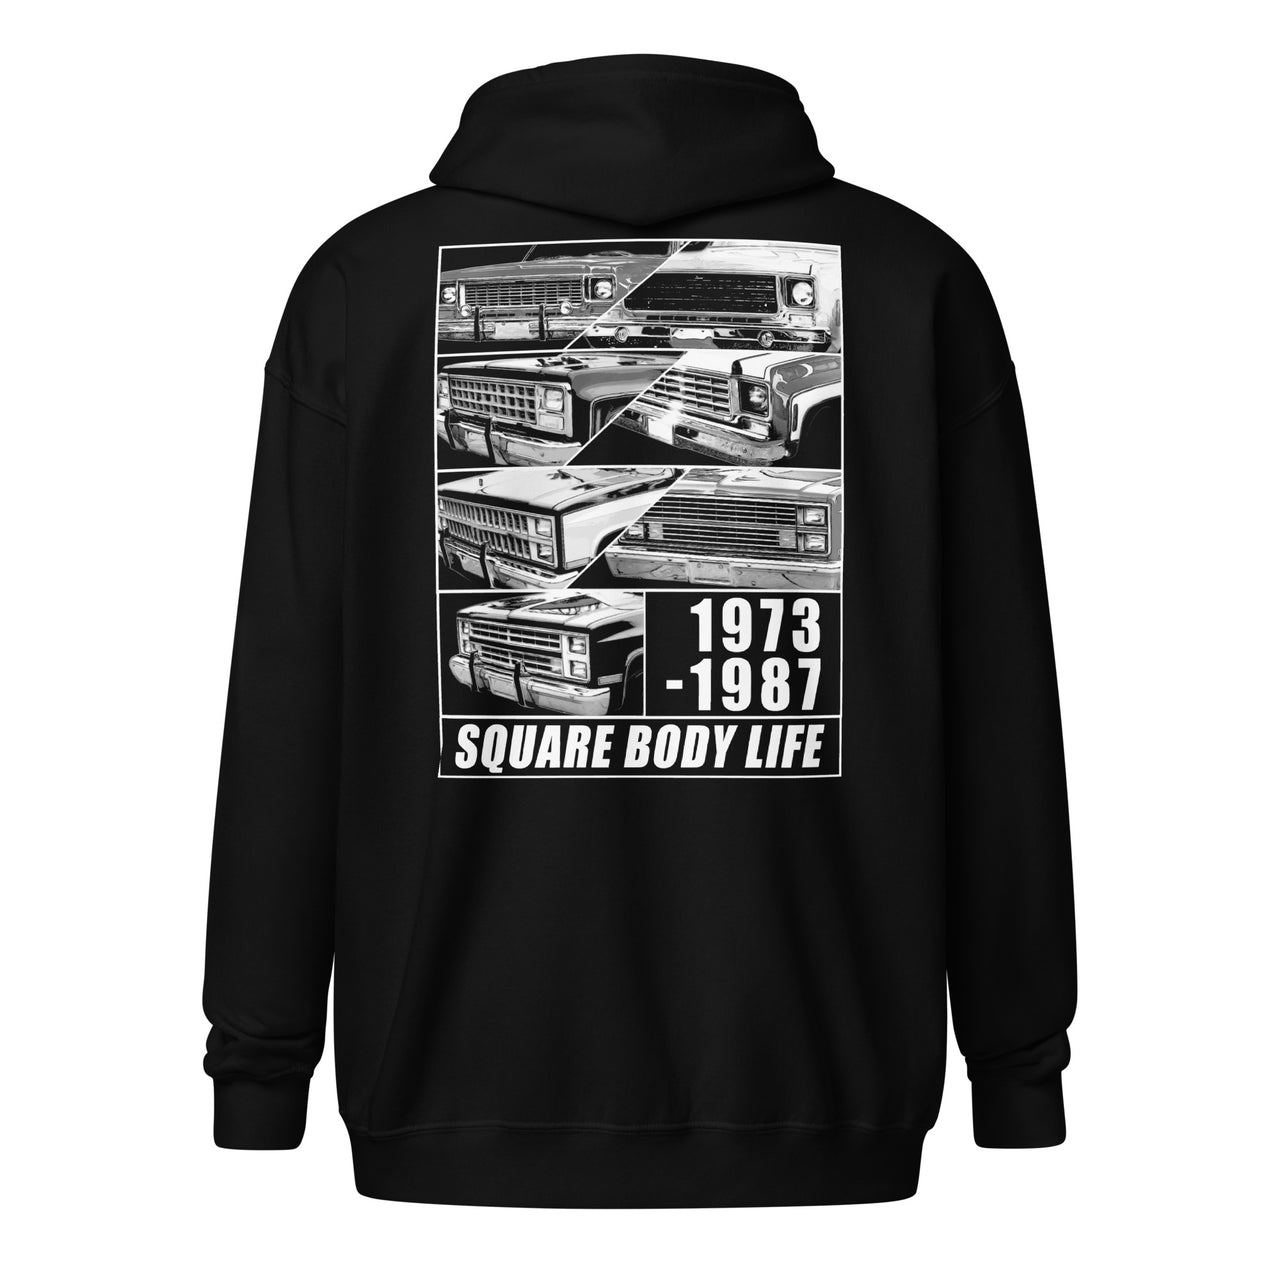 Square Body truck zip up hoodie in black - back view